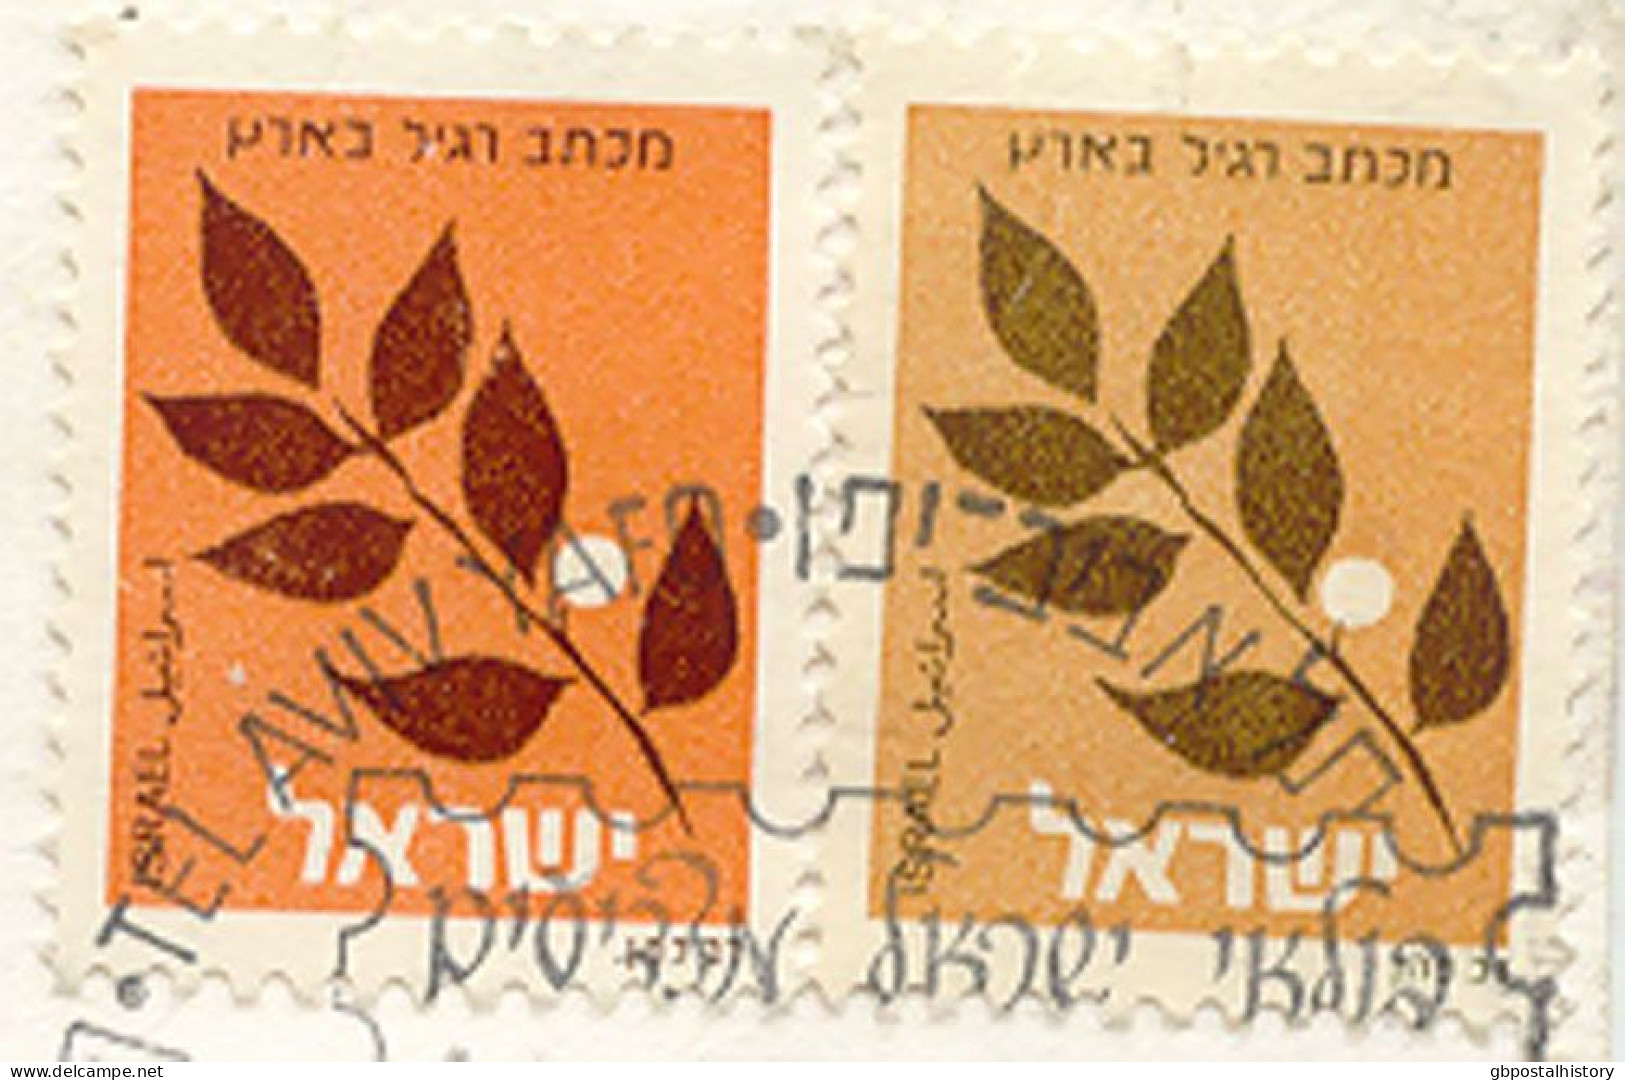 ISRAEL 1986 Branch Without Valuation 2 Times On Very Fine Cover With SST "AMERIPEX '86 22.5.1986", MAJOR ERROR & VARIETY - Covers & Documents